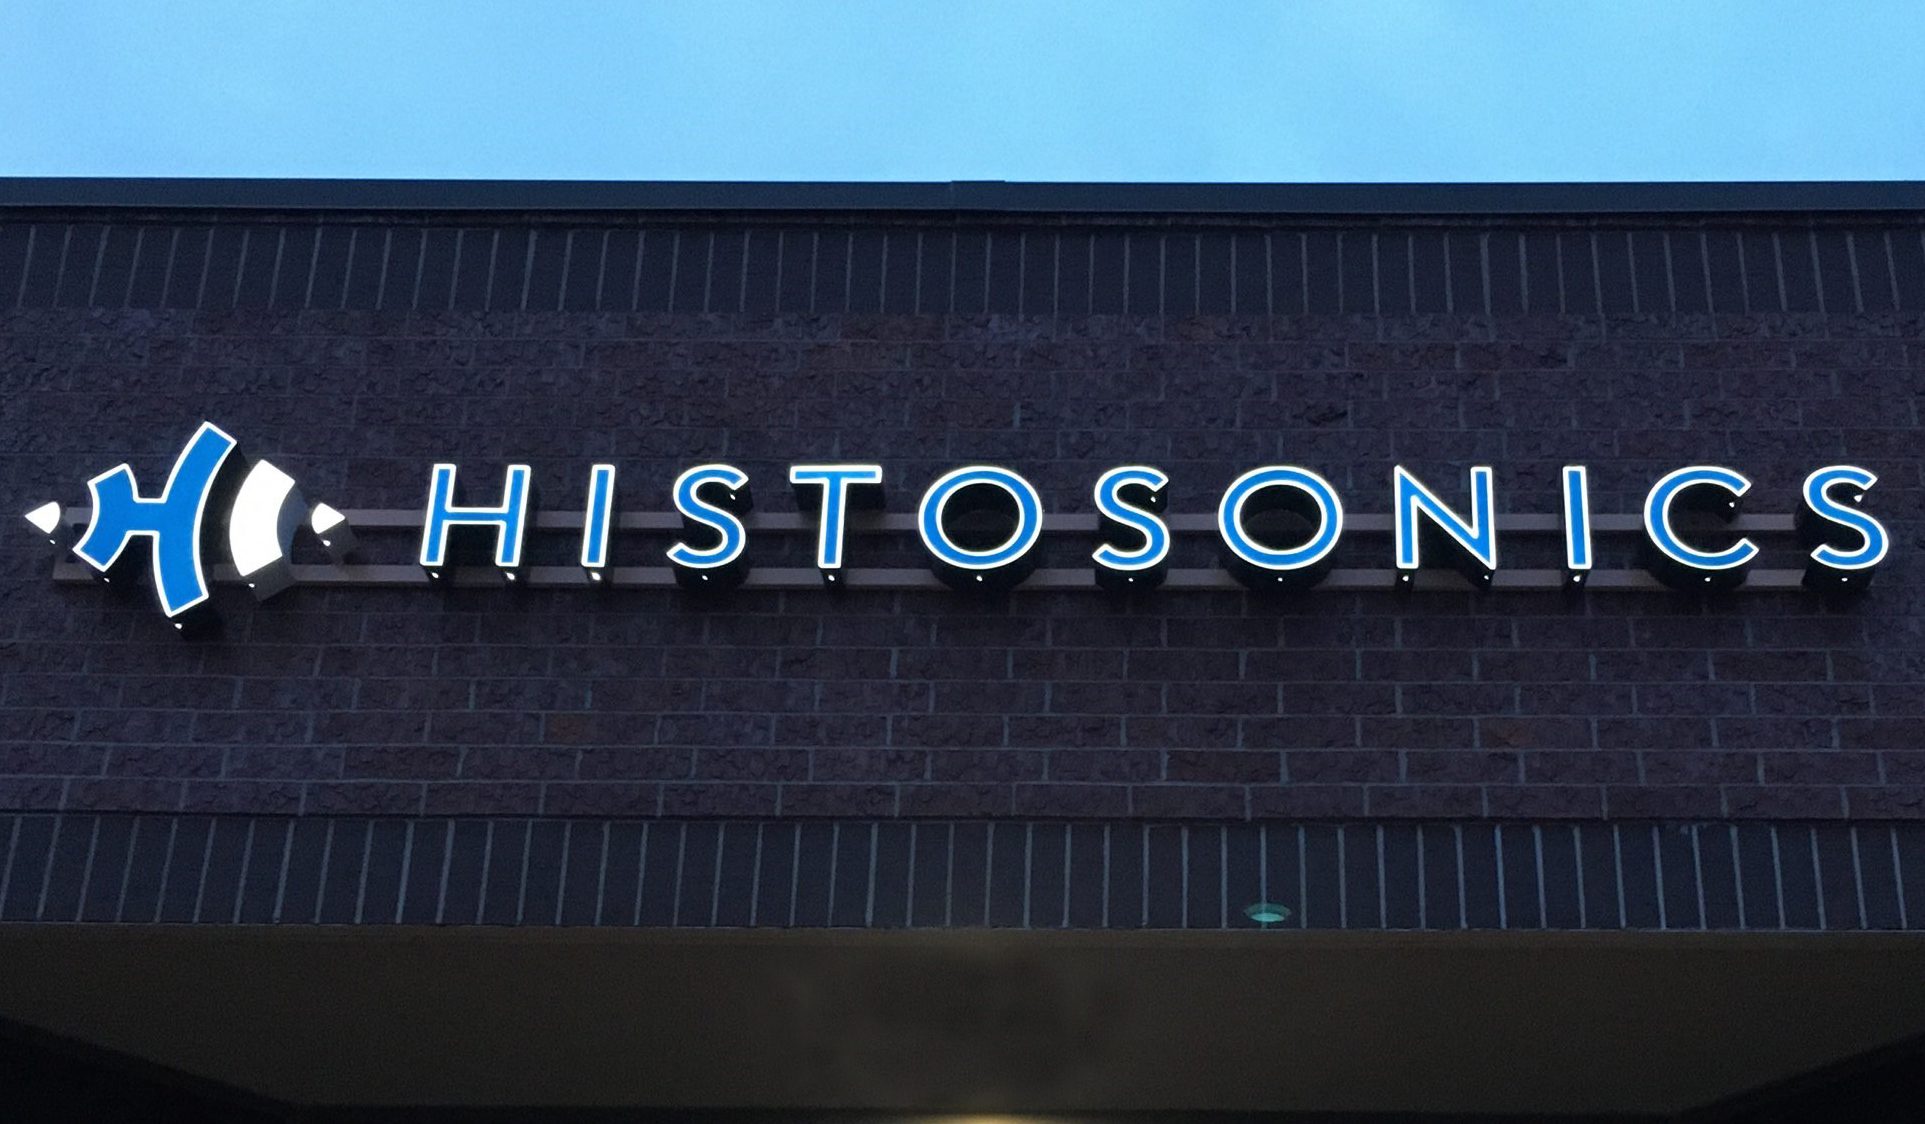 The front sign of the HistoSonics building